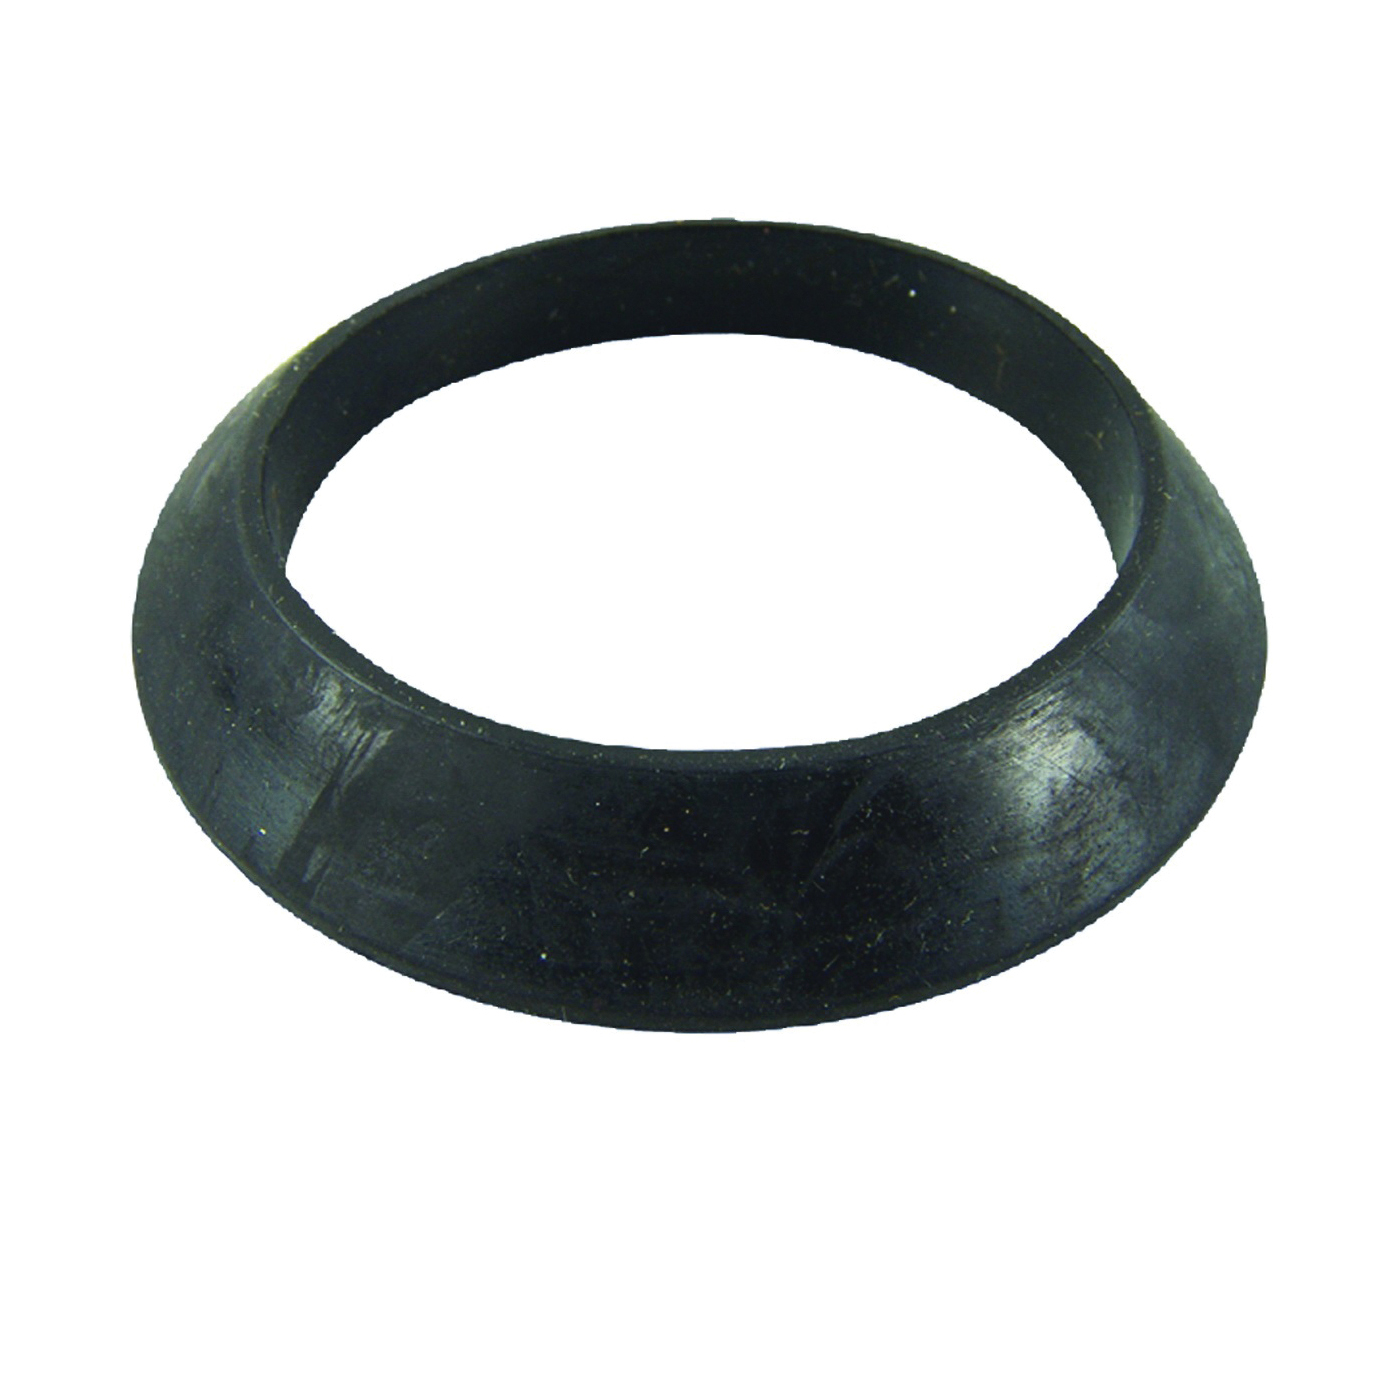 Danco 88361 Tank-To-Bowl Spud Gasket, Rubber, Black, For: Mansfield Toilets